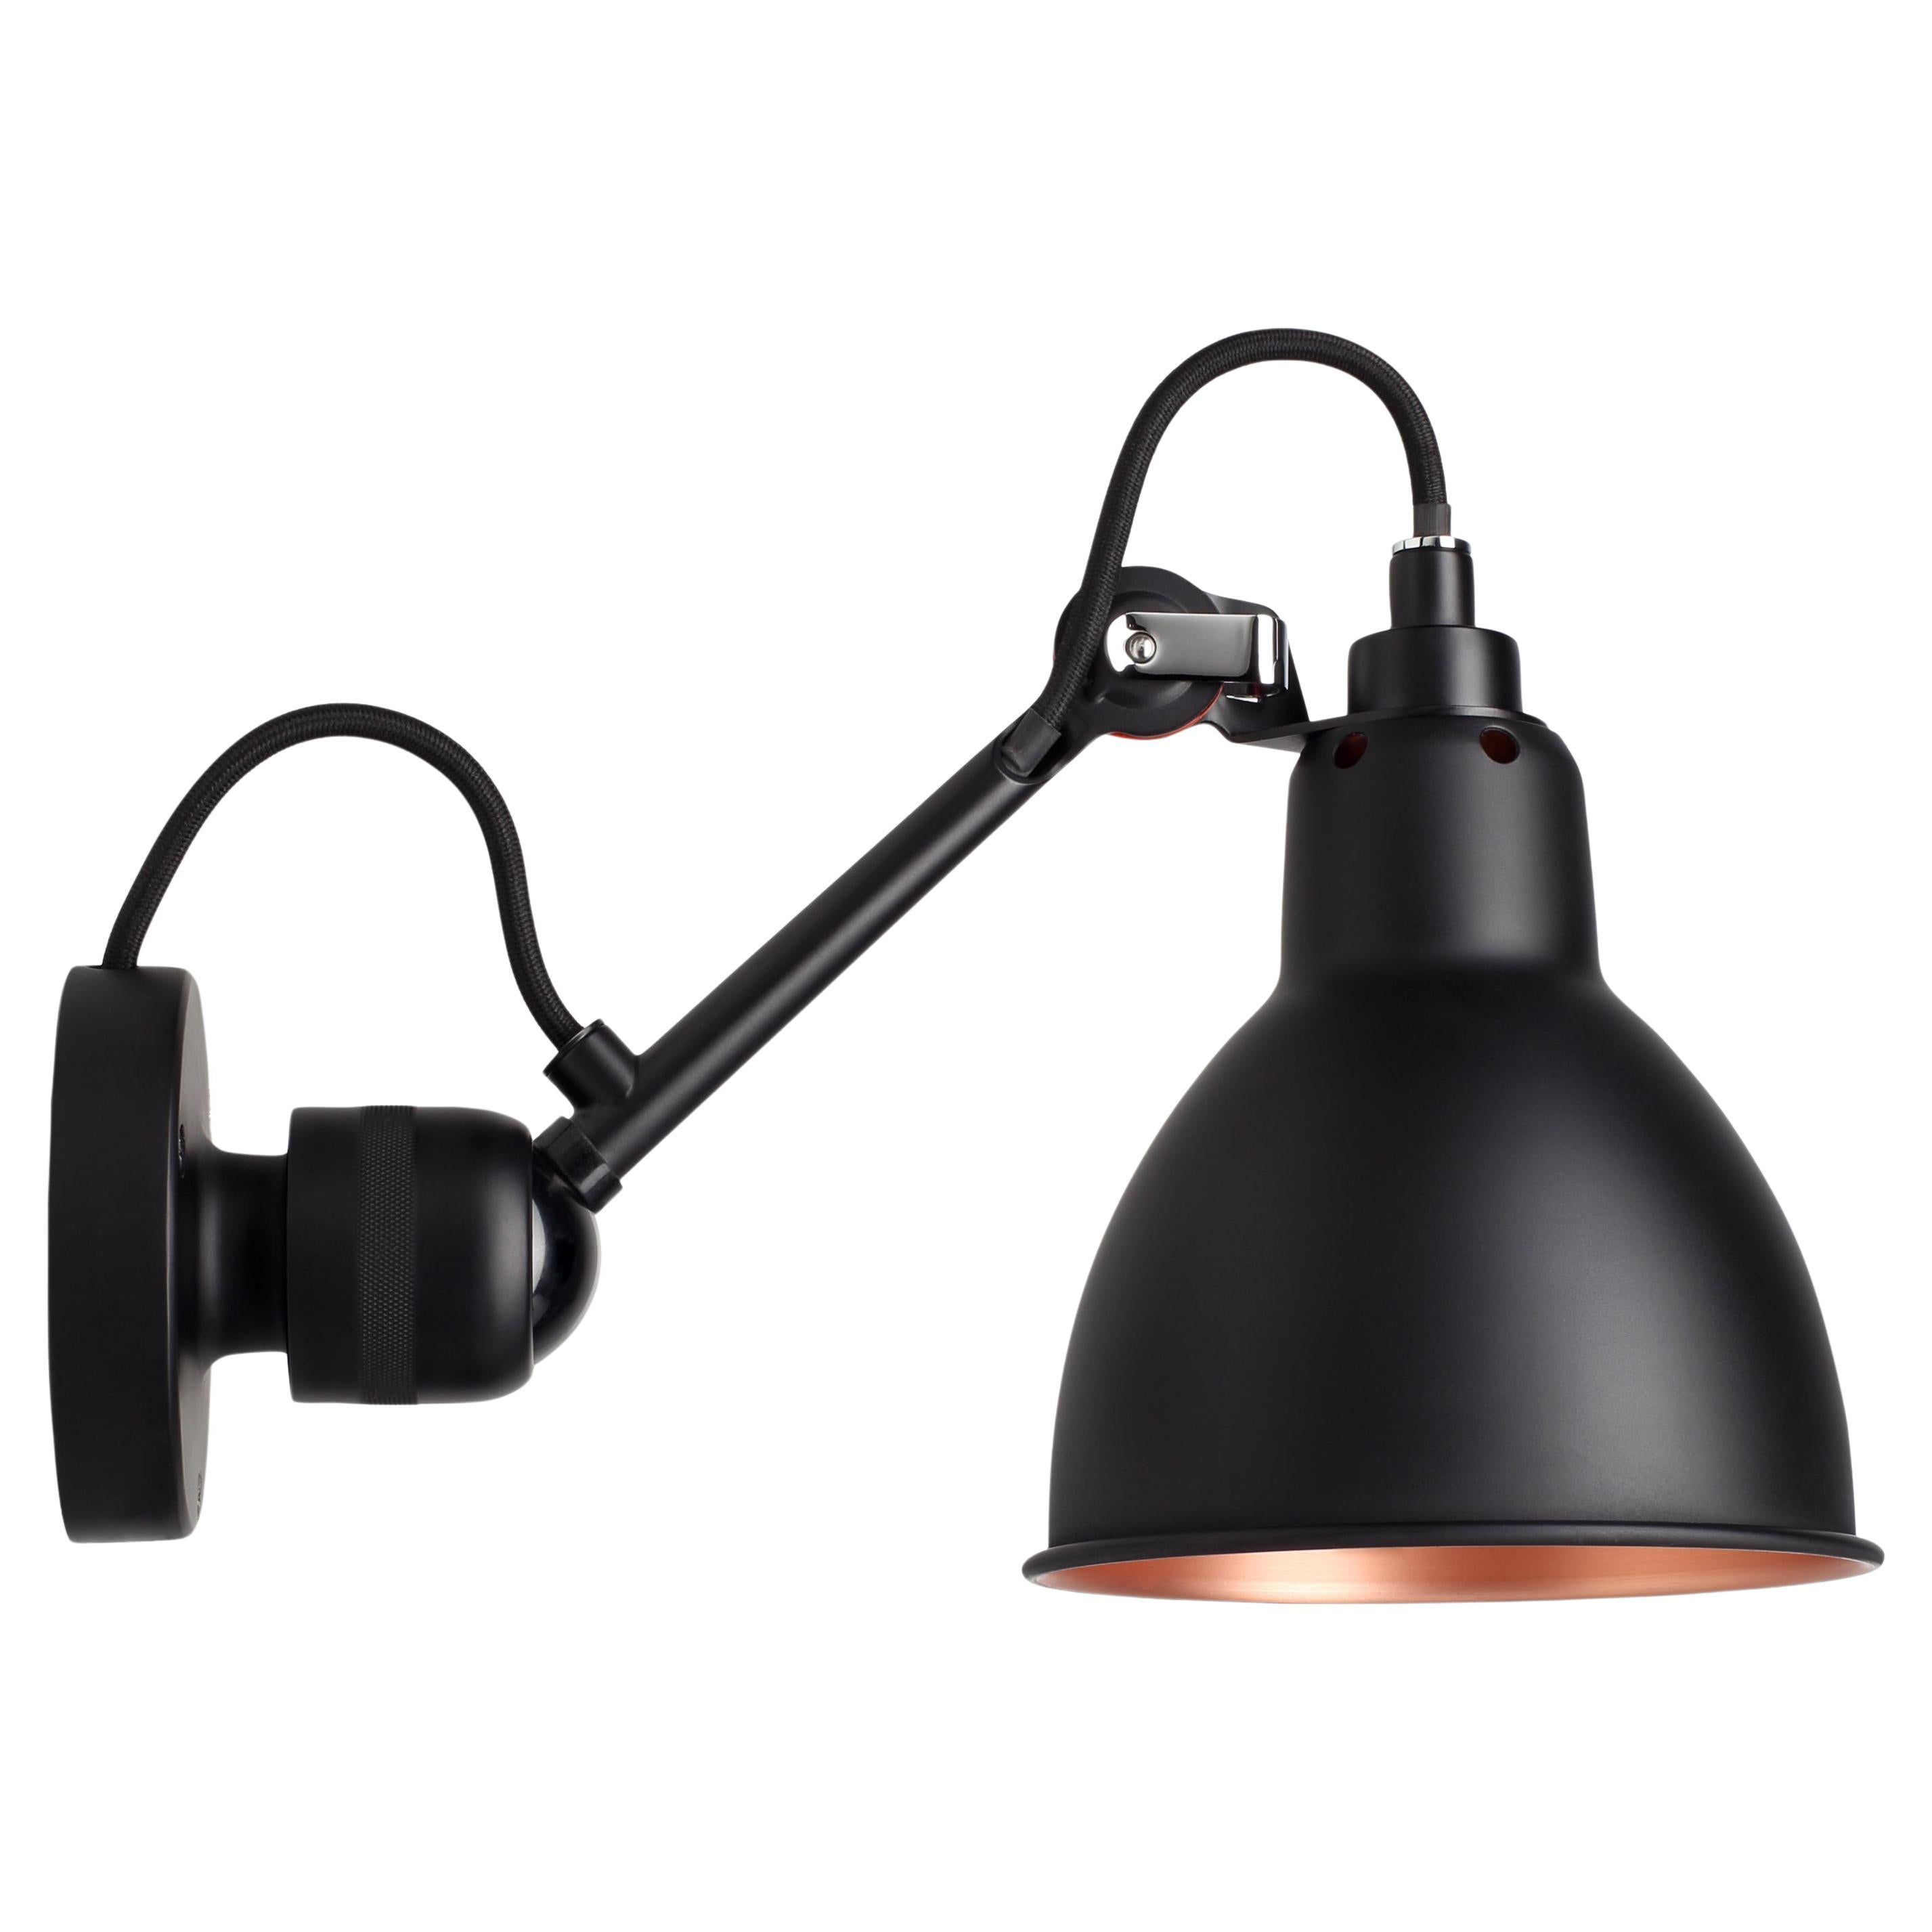 DCW Editions La Lampe Gras N°304 Wall Lamp in Black Arm and Black Copper Shade For Sale